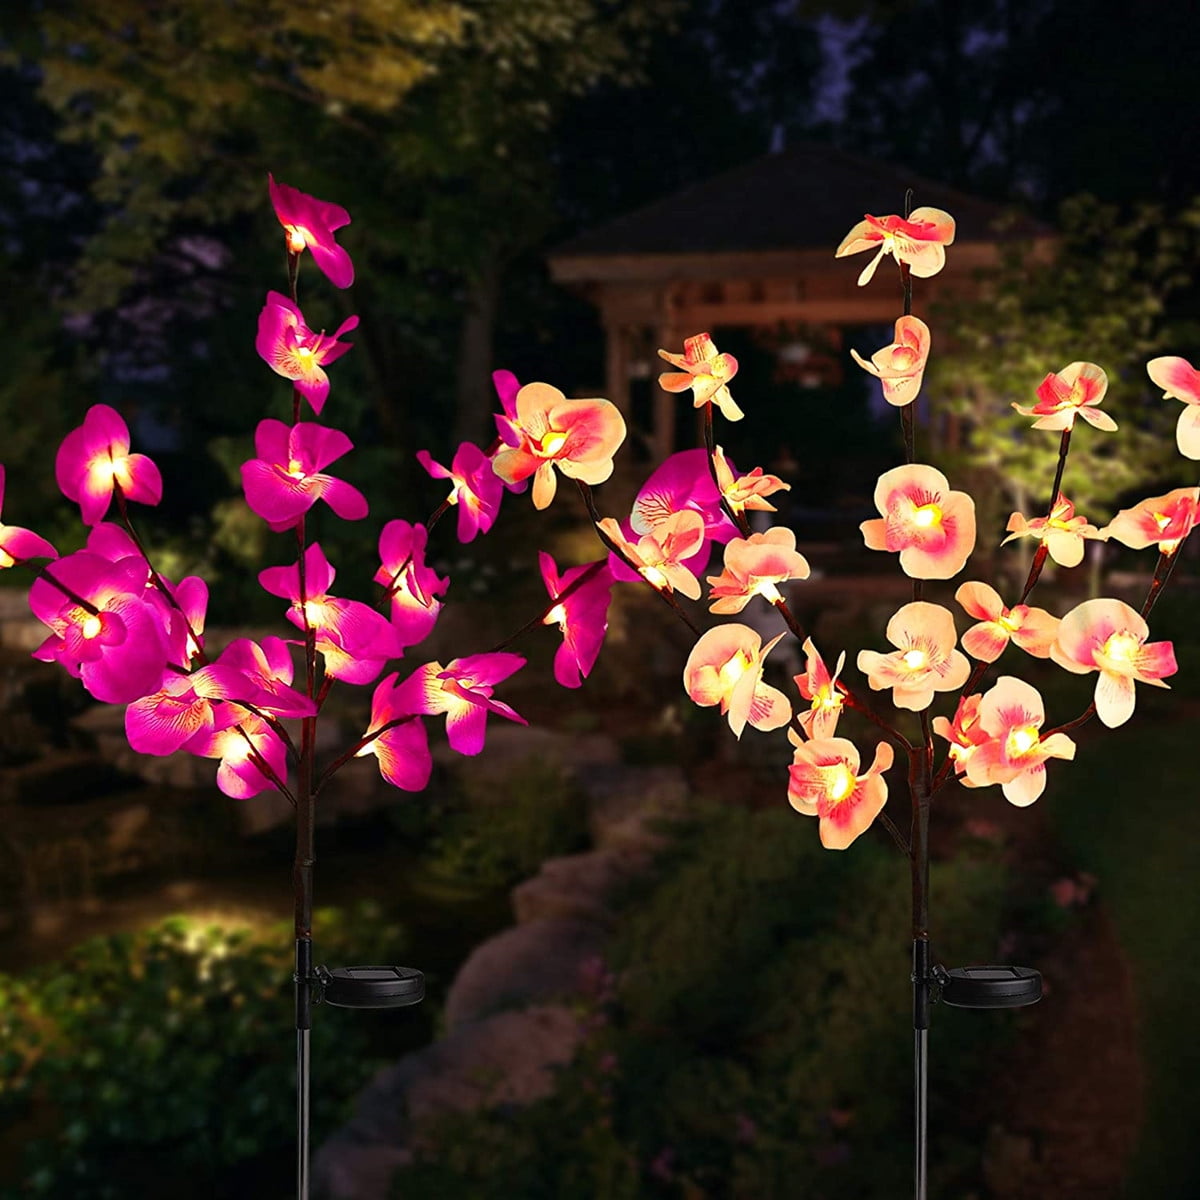 Solar Garden Flower Light,Waterproof Solar Powered Orchid Lights with 40 Flower,2 Mode Decorative Lights with Solar Panel for Patio Yard Villa Lawn Pathway Decoration,Solar Landscape Path Light 